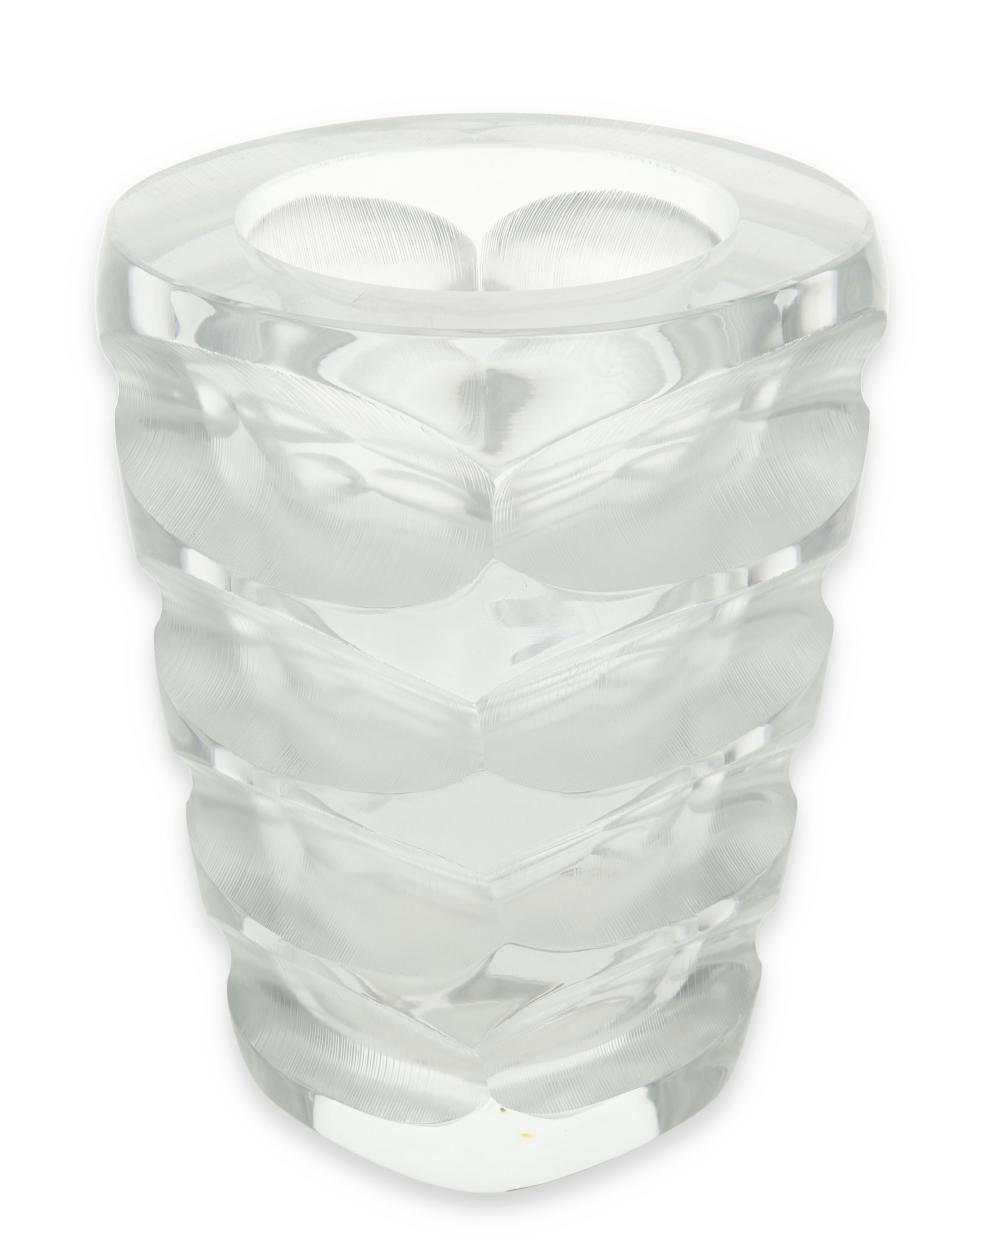 A LALIQUE MORTEFOUTAINE GLASS 2ee7ea